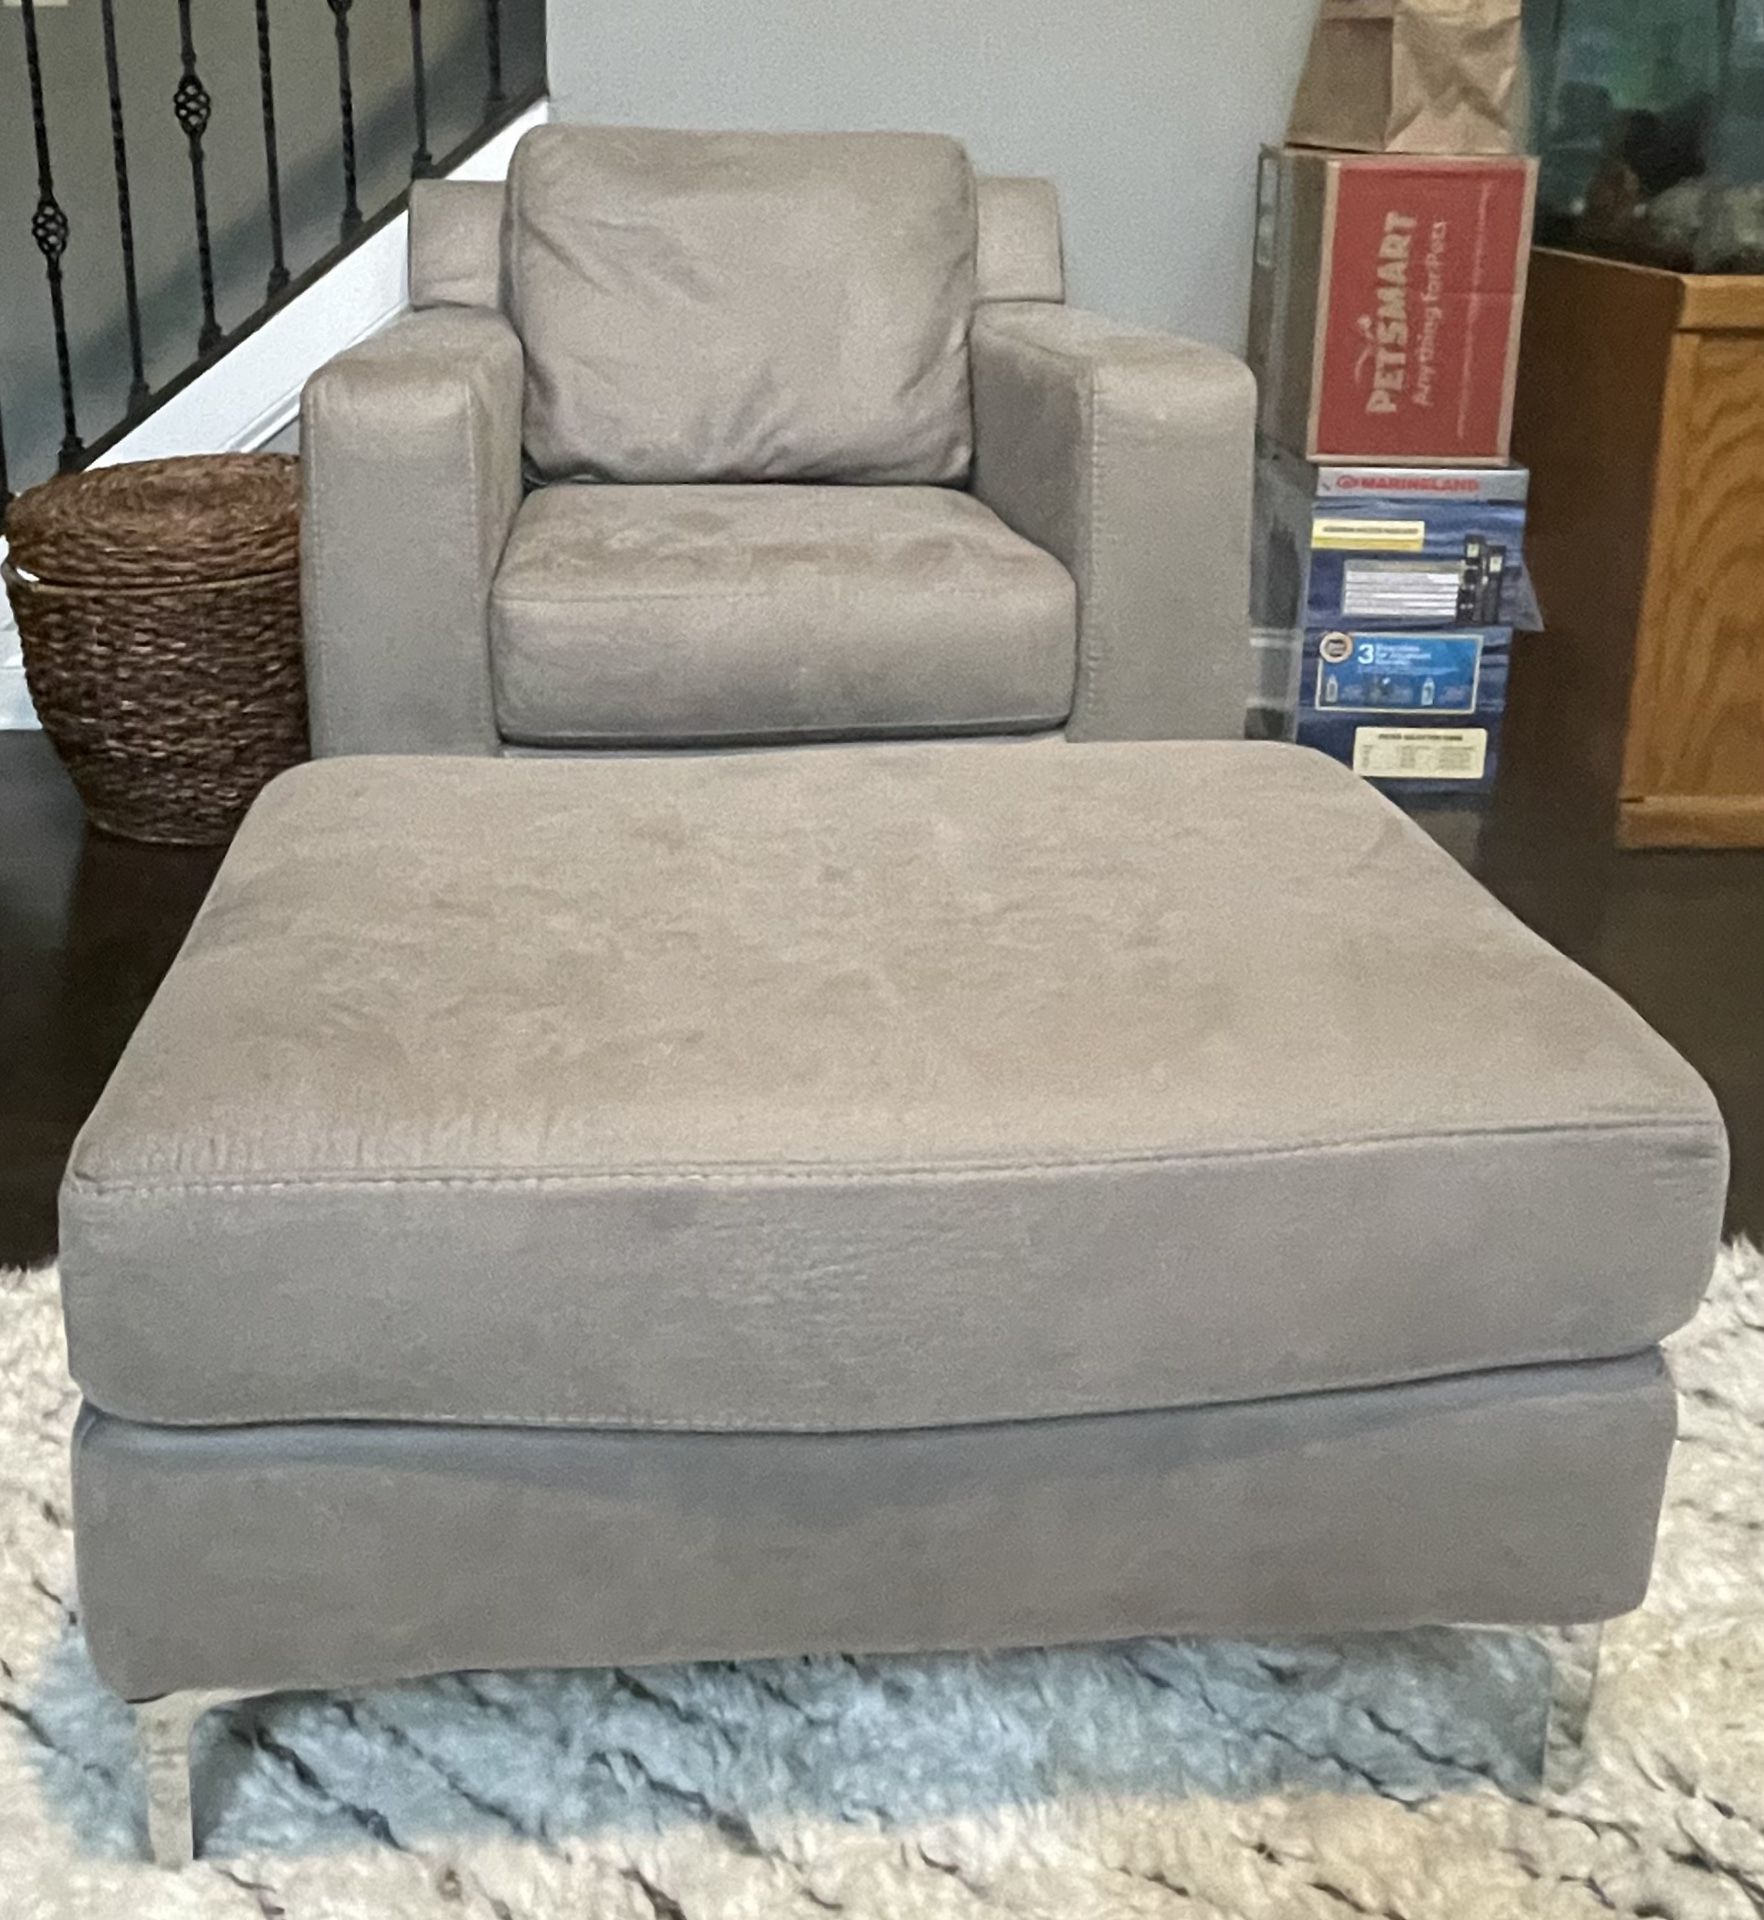 Gray Oversized Chair And Ottoman Set